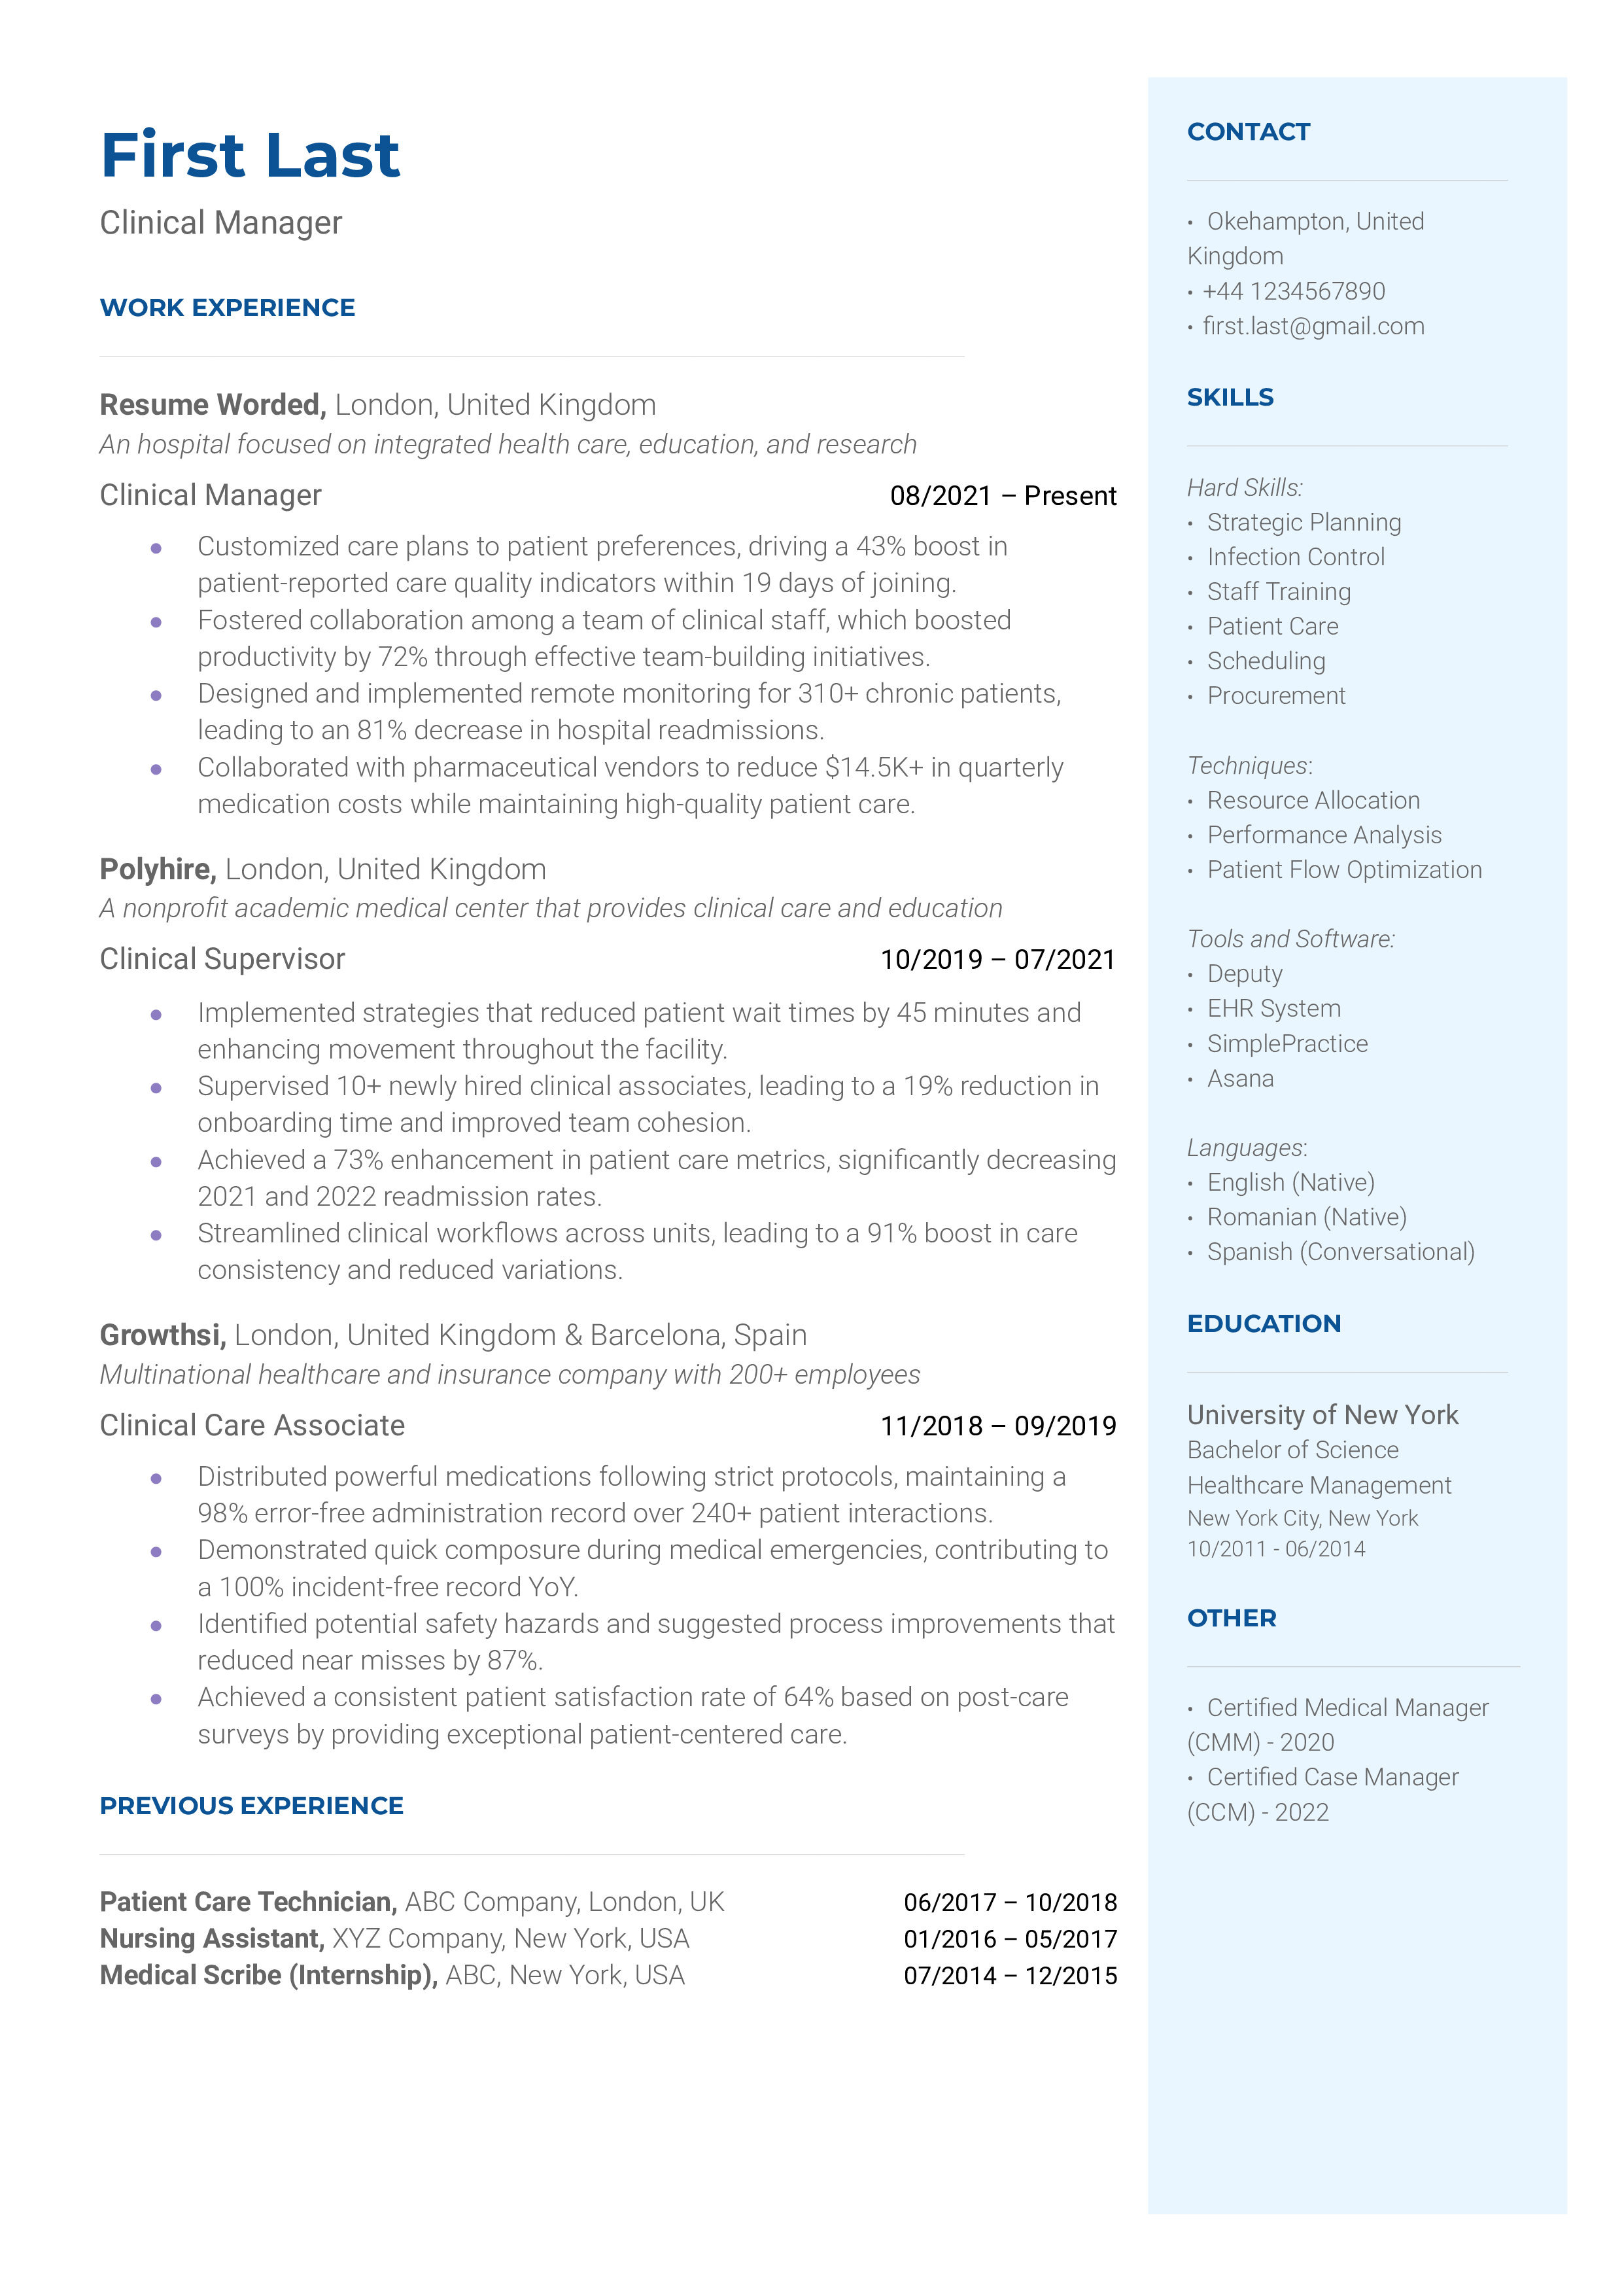 Clinical Manager Resume Sample